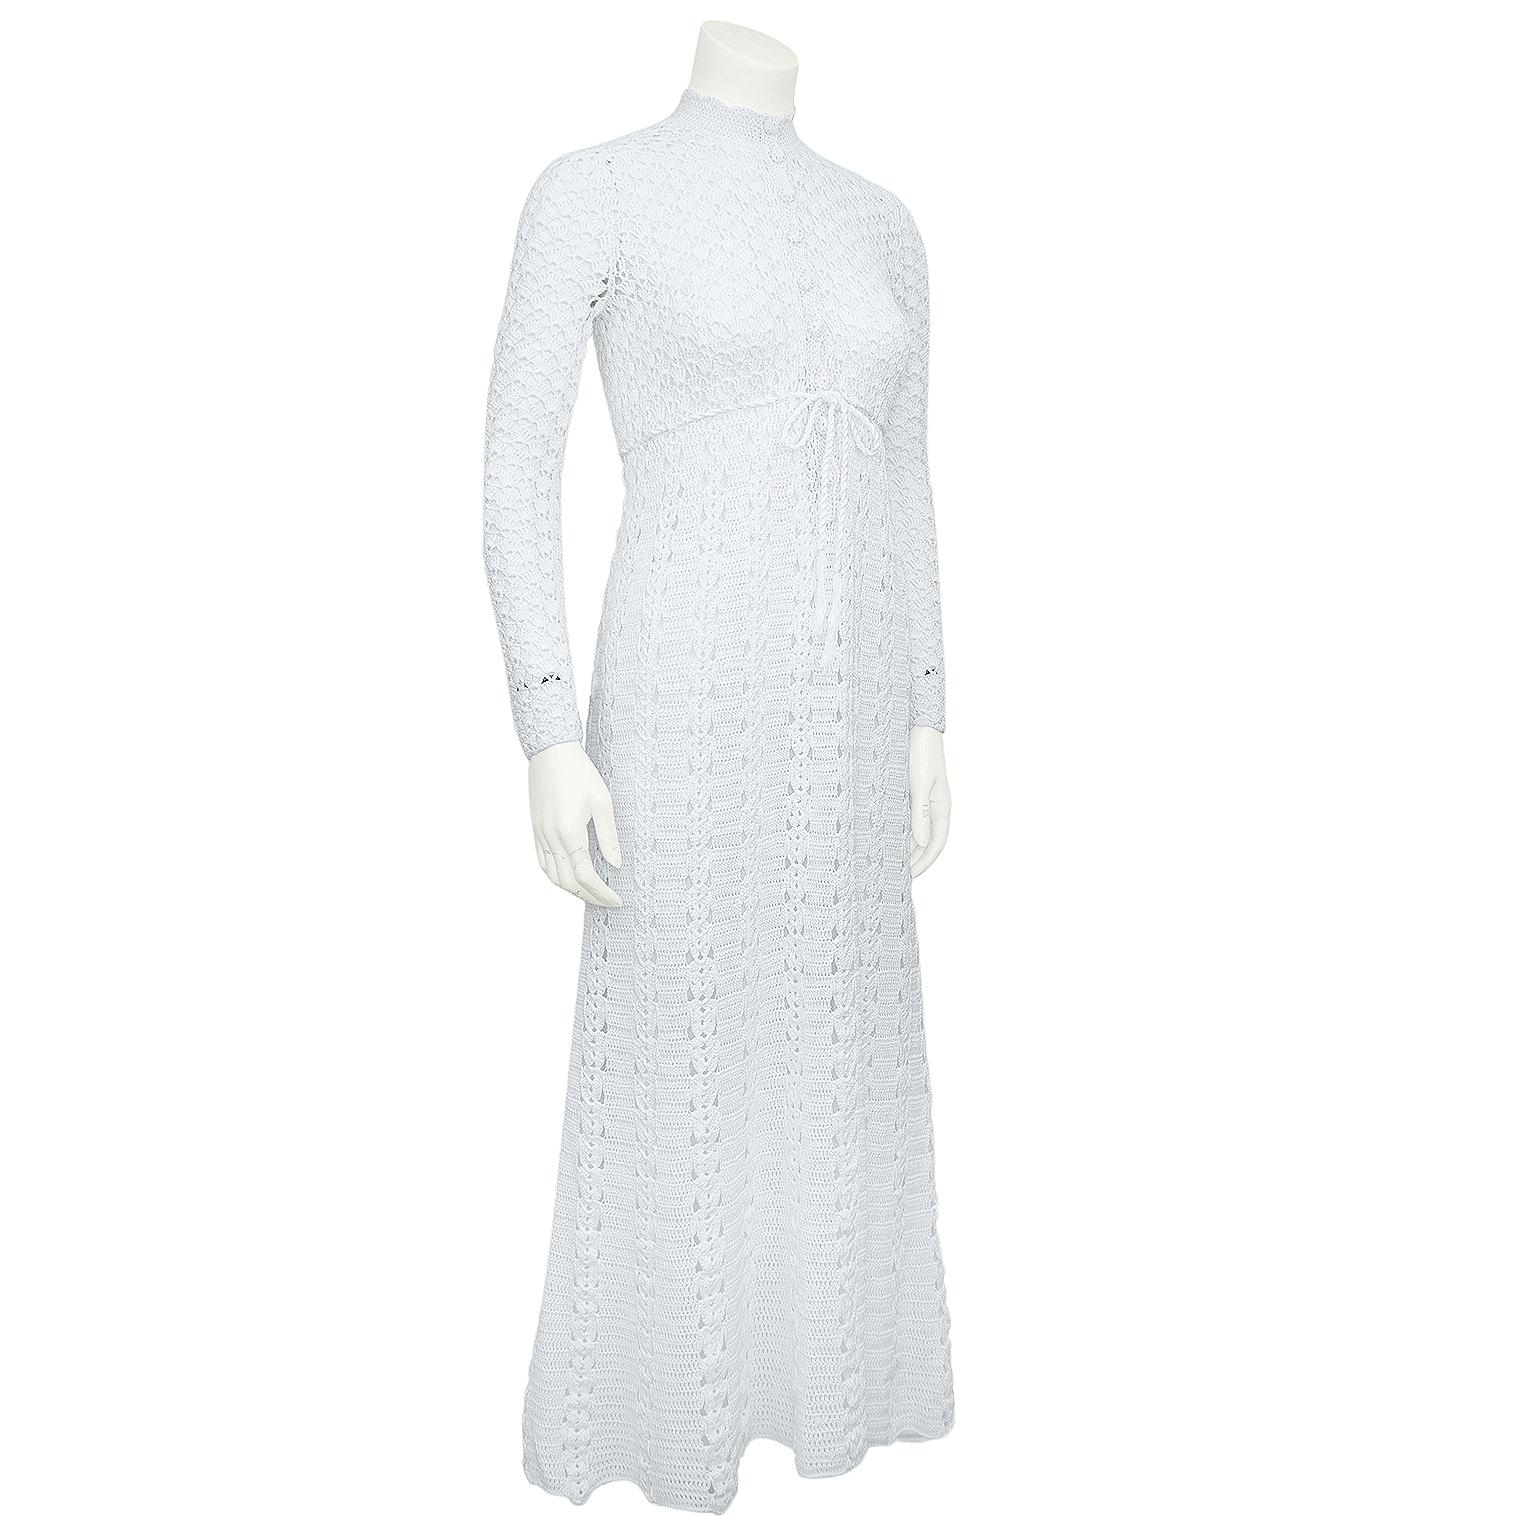 Beautiful bohemian handmade label-less  white cotton crochet dress from the 1970s. Mock neck with long sleeves, buttons down centre front and pull through tie at the waist. Skirt skims the body and can be a midi or maxi dress depending on your